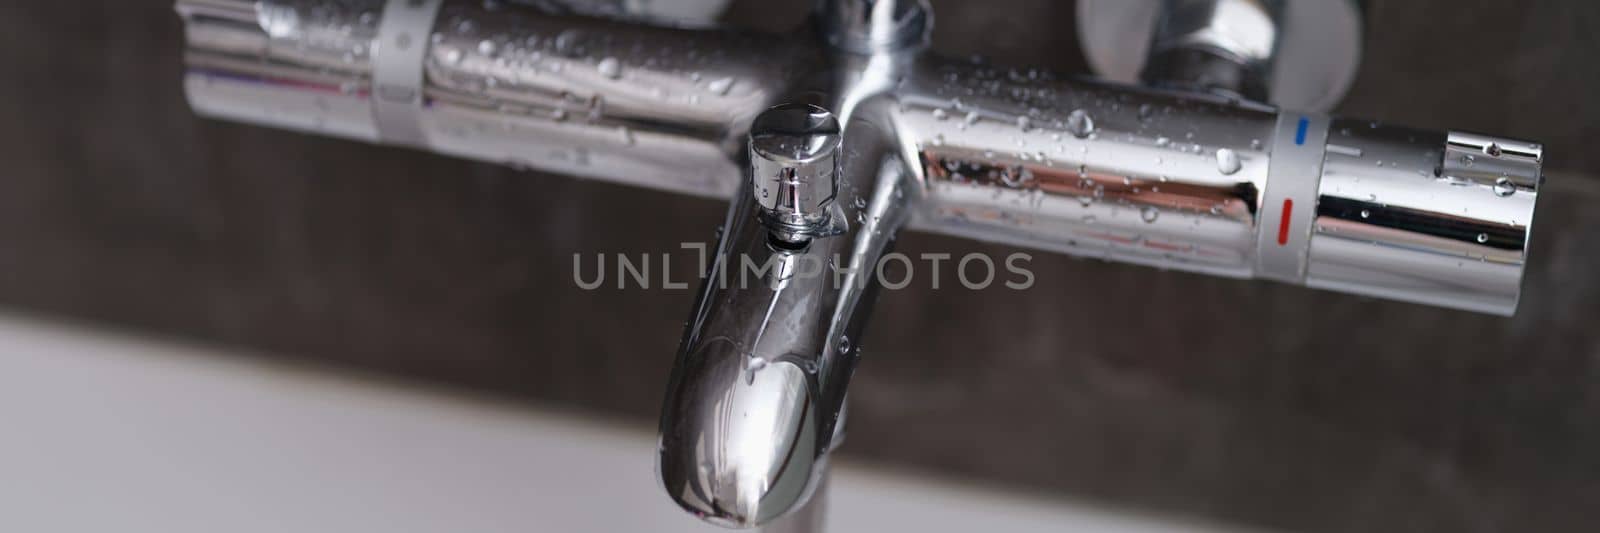 Chrome faucets on white ceramic bathtub in bathroom by kuprevich